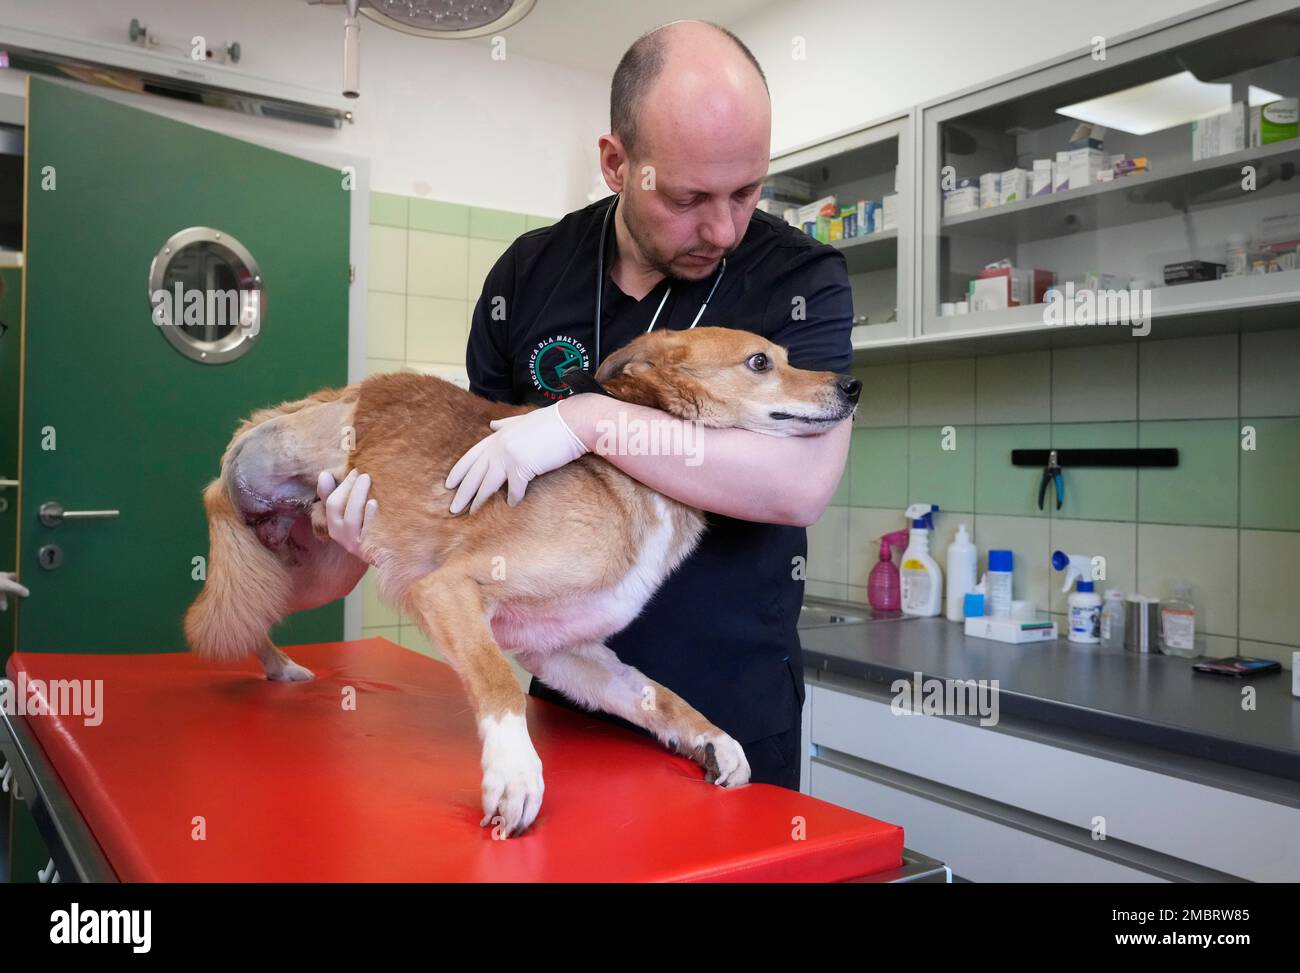 Veterinary doctor Redeslew Fediczynsk embraces a dog during treatment at  the ADA foundation centre in Przemysl, southeastern Poland, Monday, March  28, 2022. Amid the exodus of more than 2.2 million Ukrainian refugees